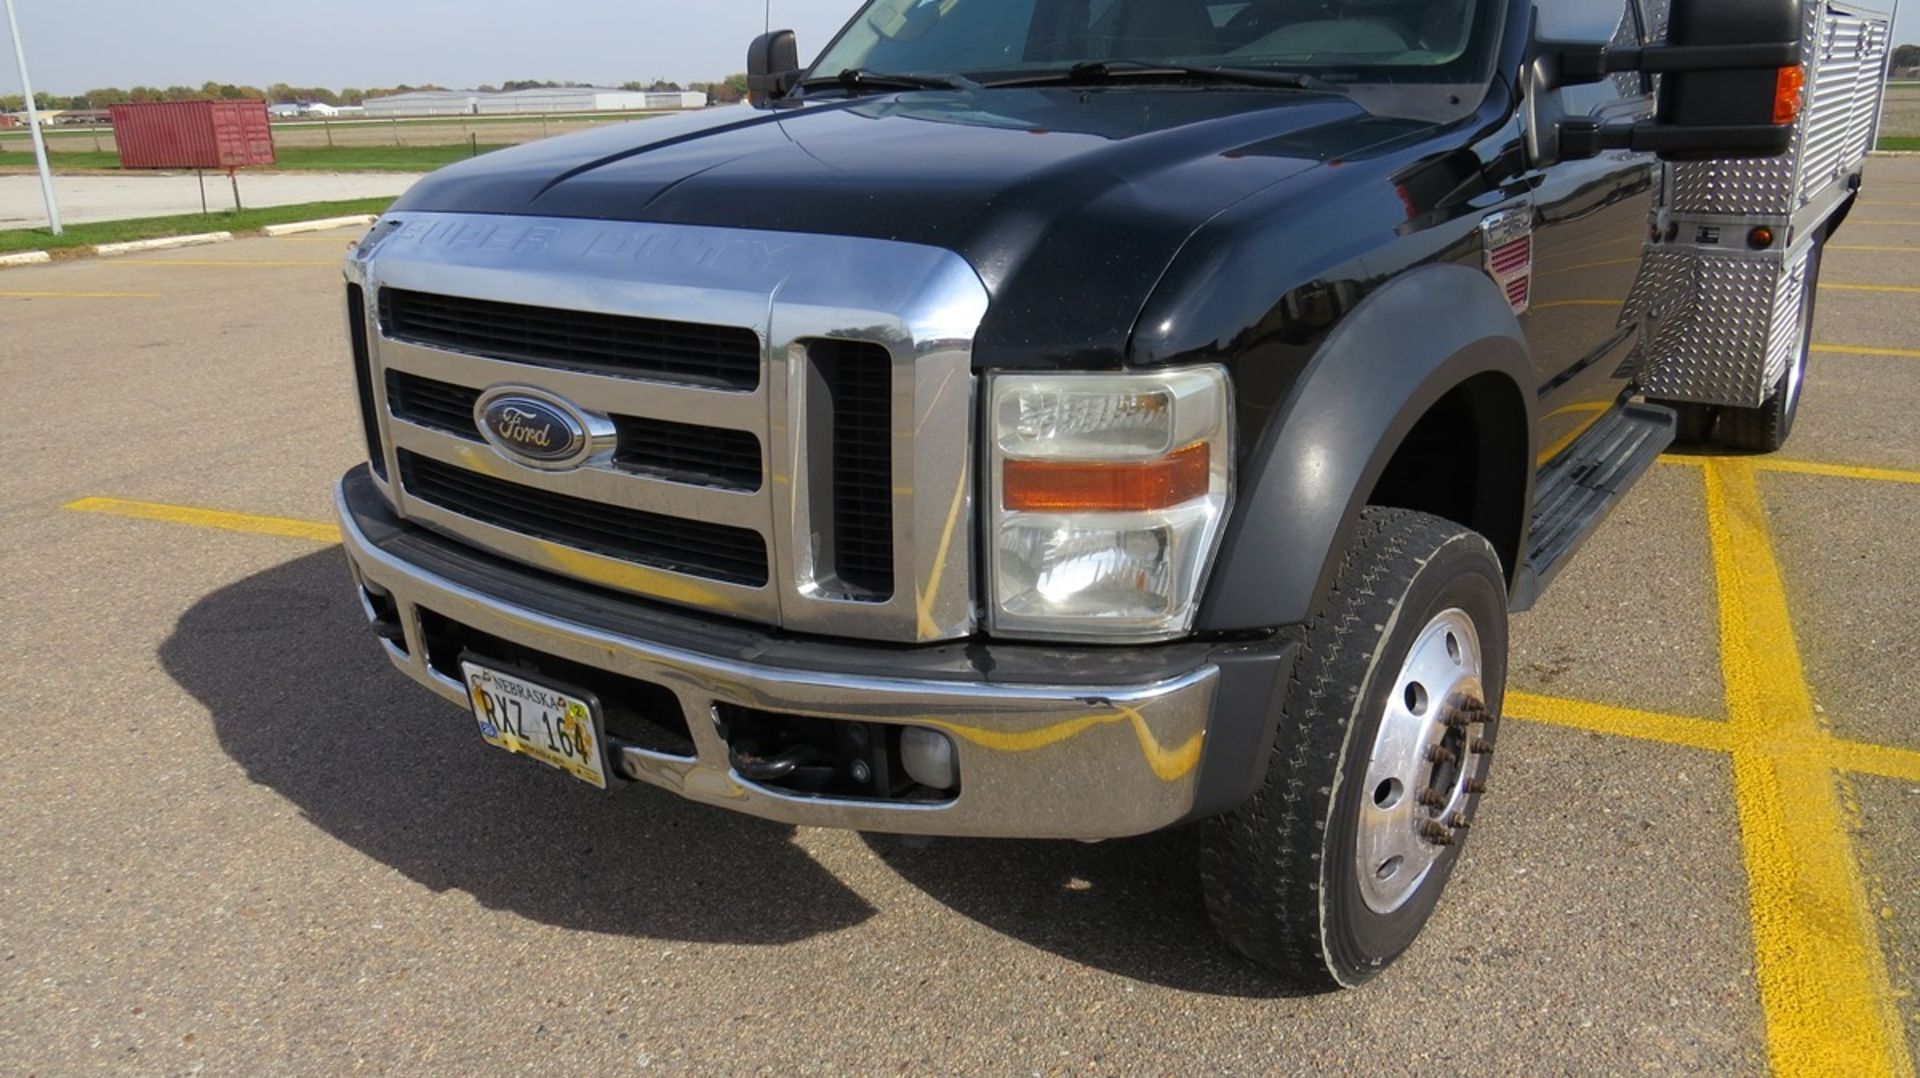 2008 Ford Model F-550 Lariat Extended Cab 4x4 Diesel 1-Ton Dually Pickup, VIN# ED26416, 6.4 Liter - Image 23 of 43